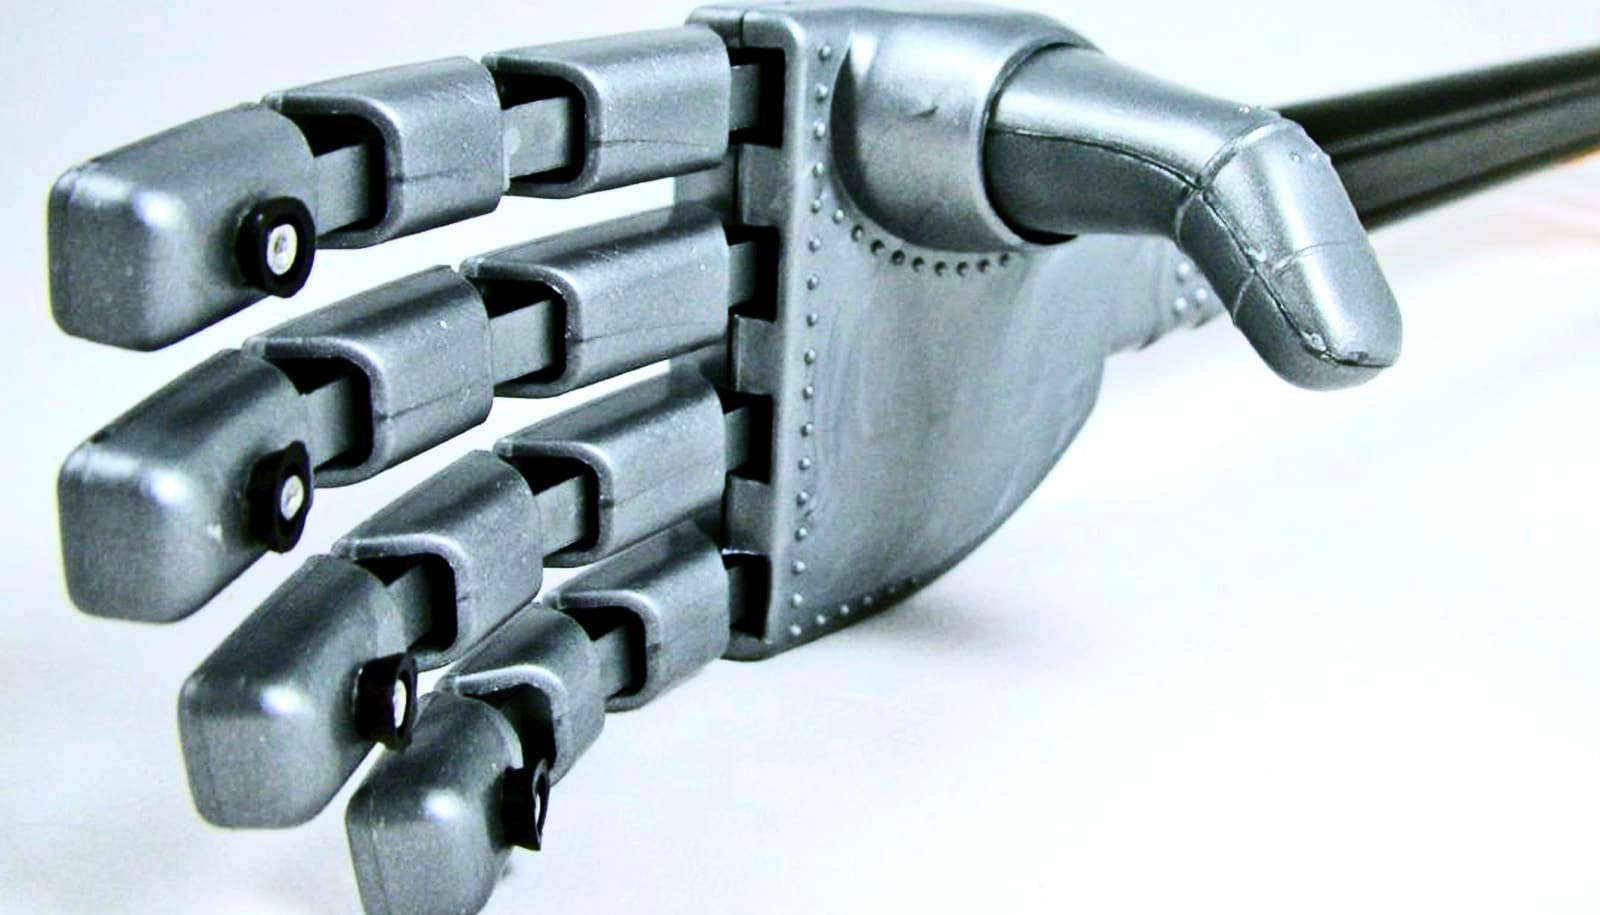 Need a hand? This robotic hand can help you p